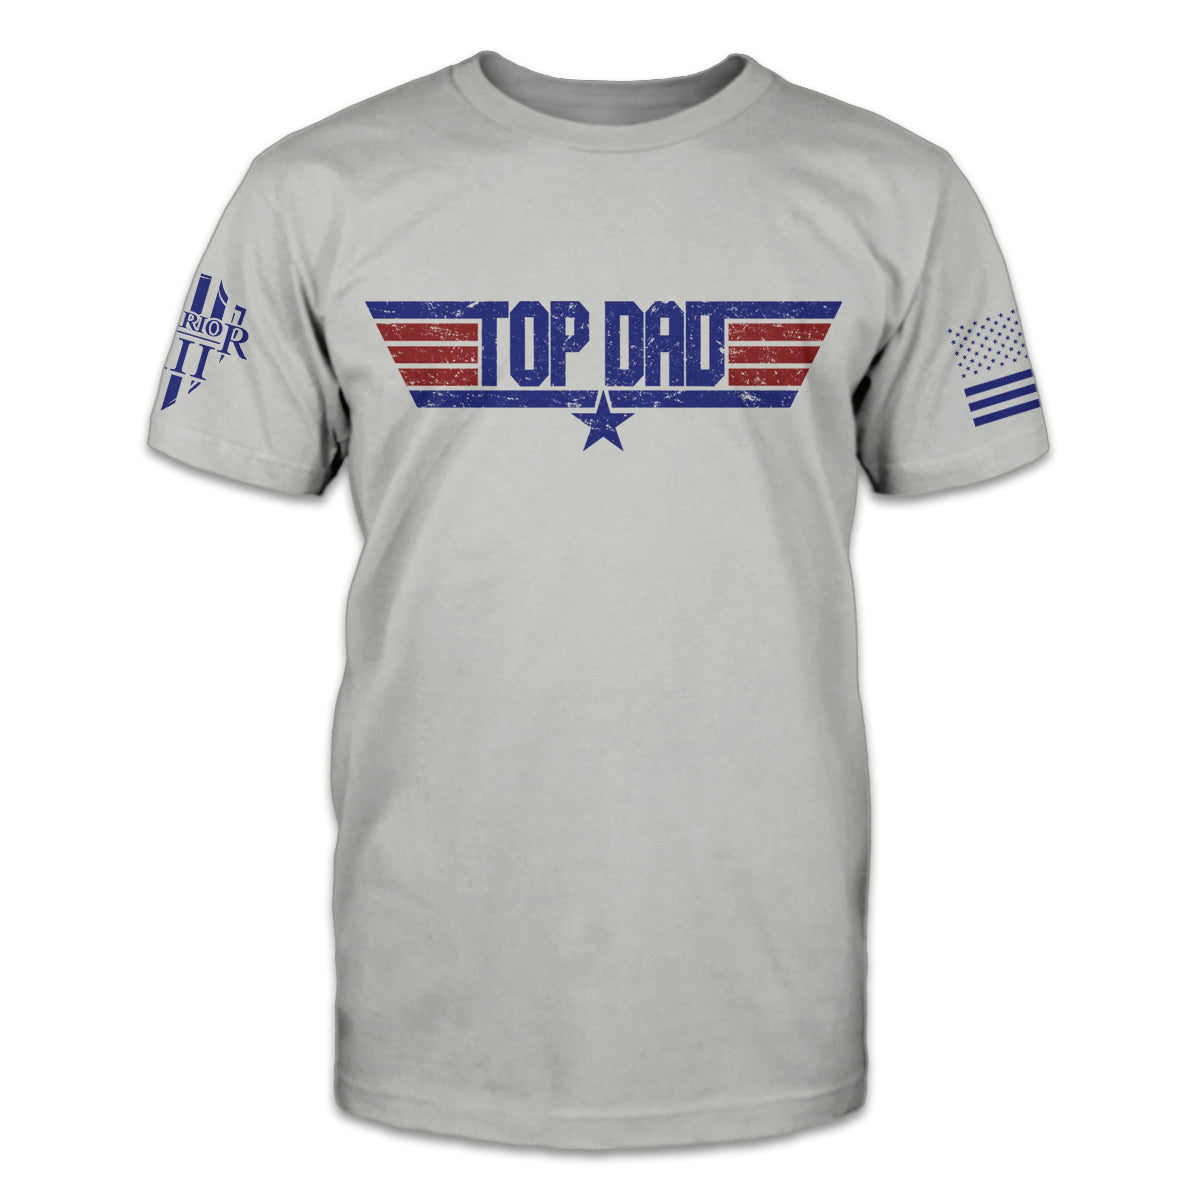 A light grey t-shirt with the words "top dad" printed on the front.